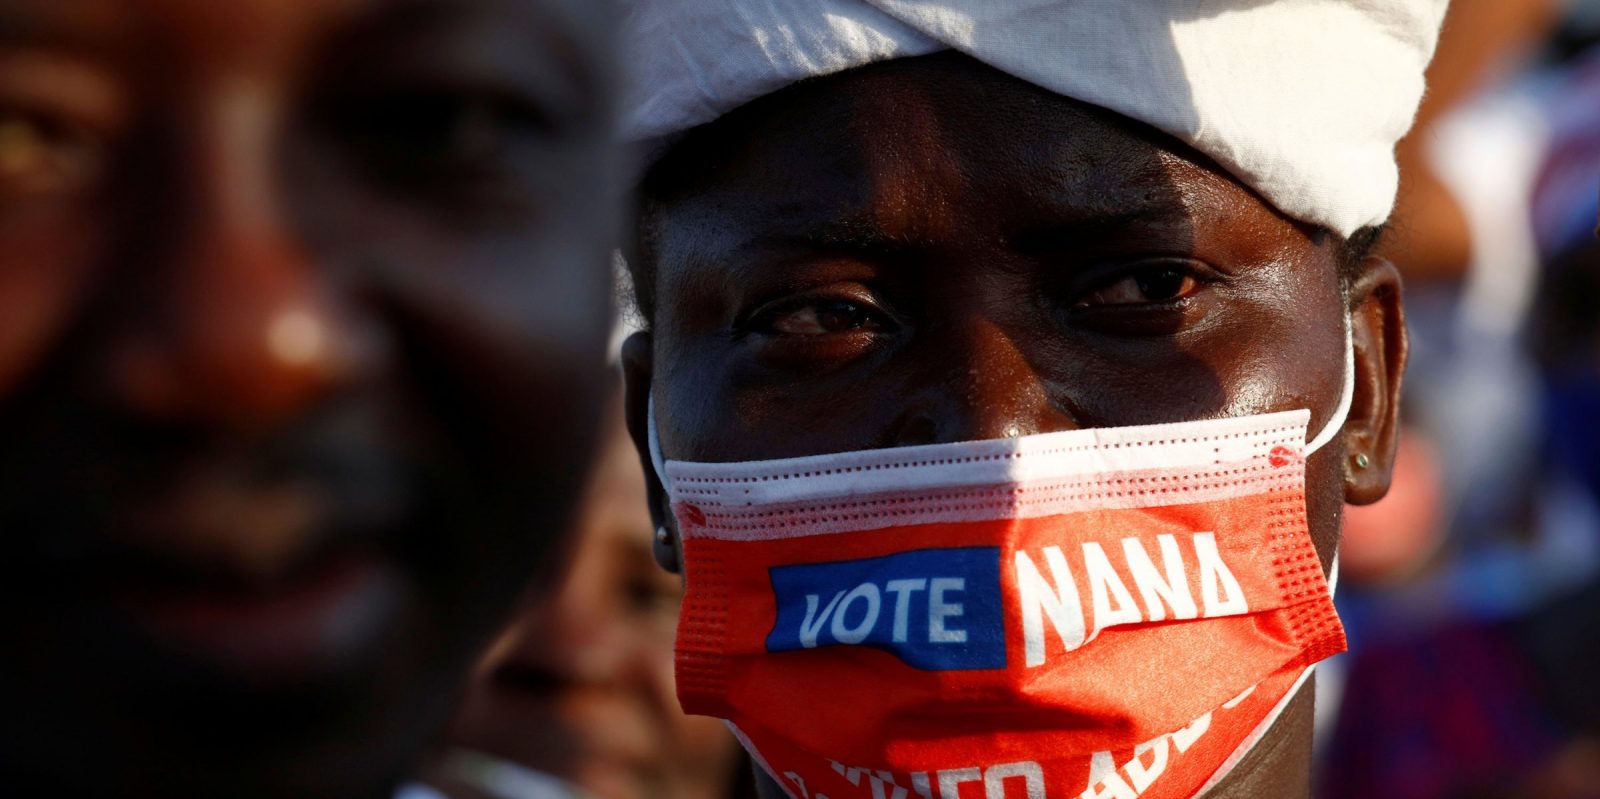 Ghana is canceling too close presidential races that old rivals face